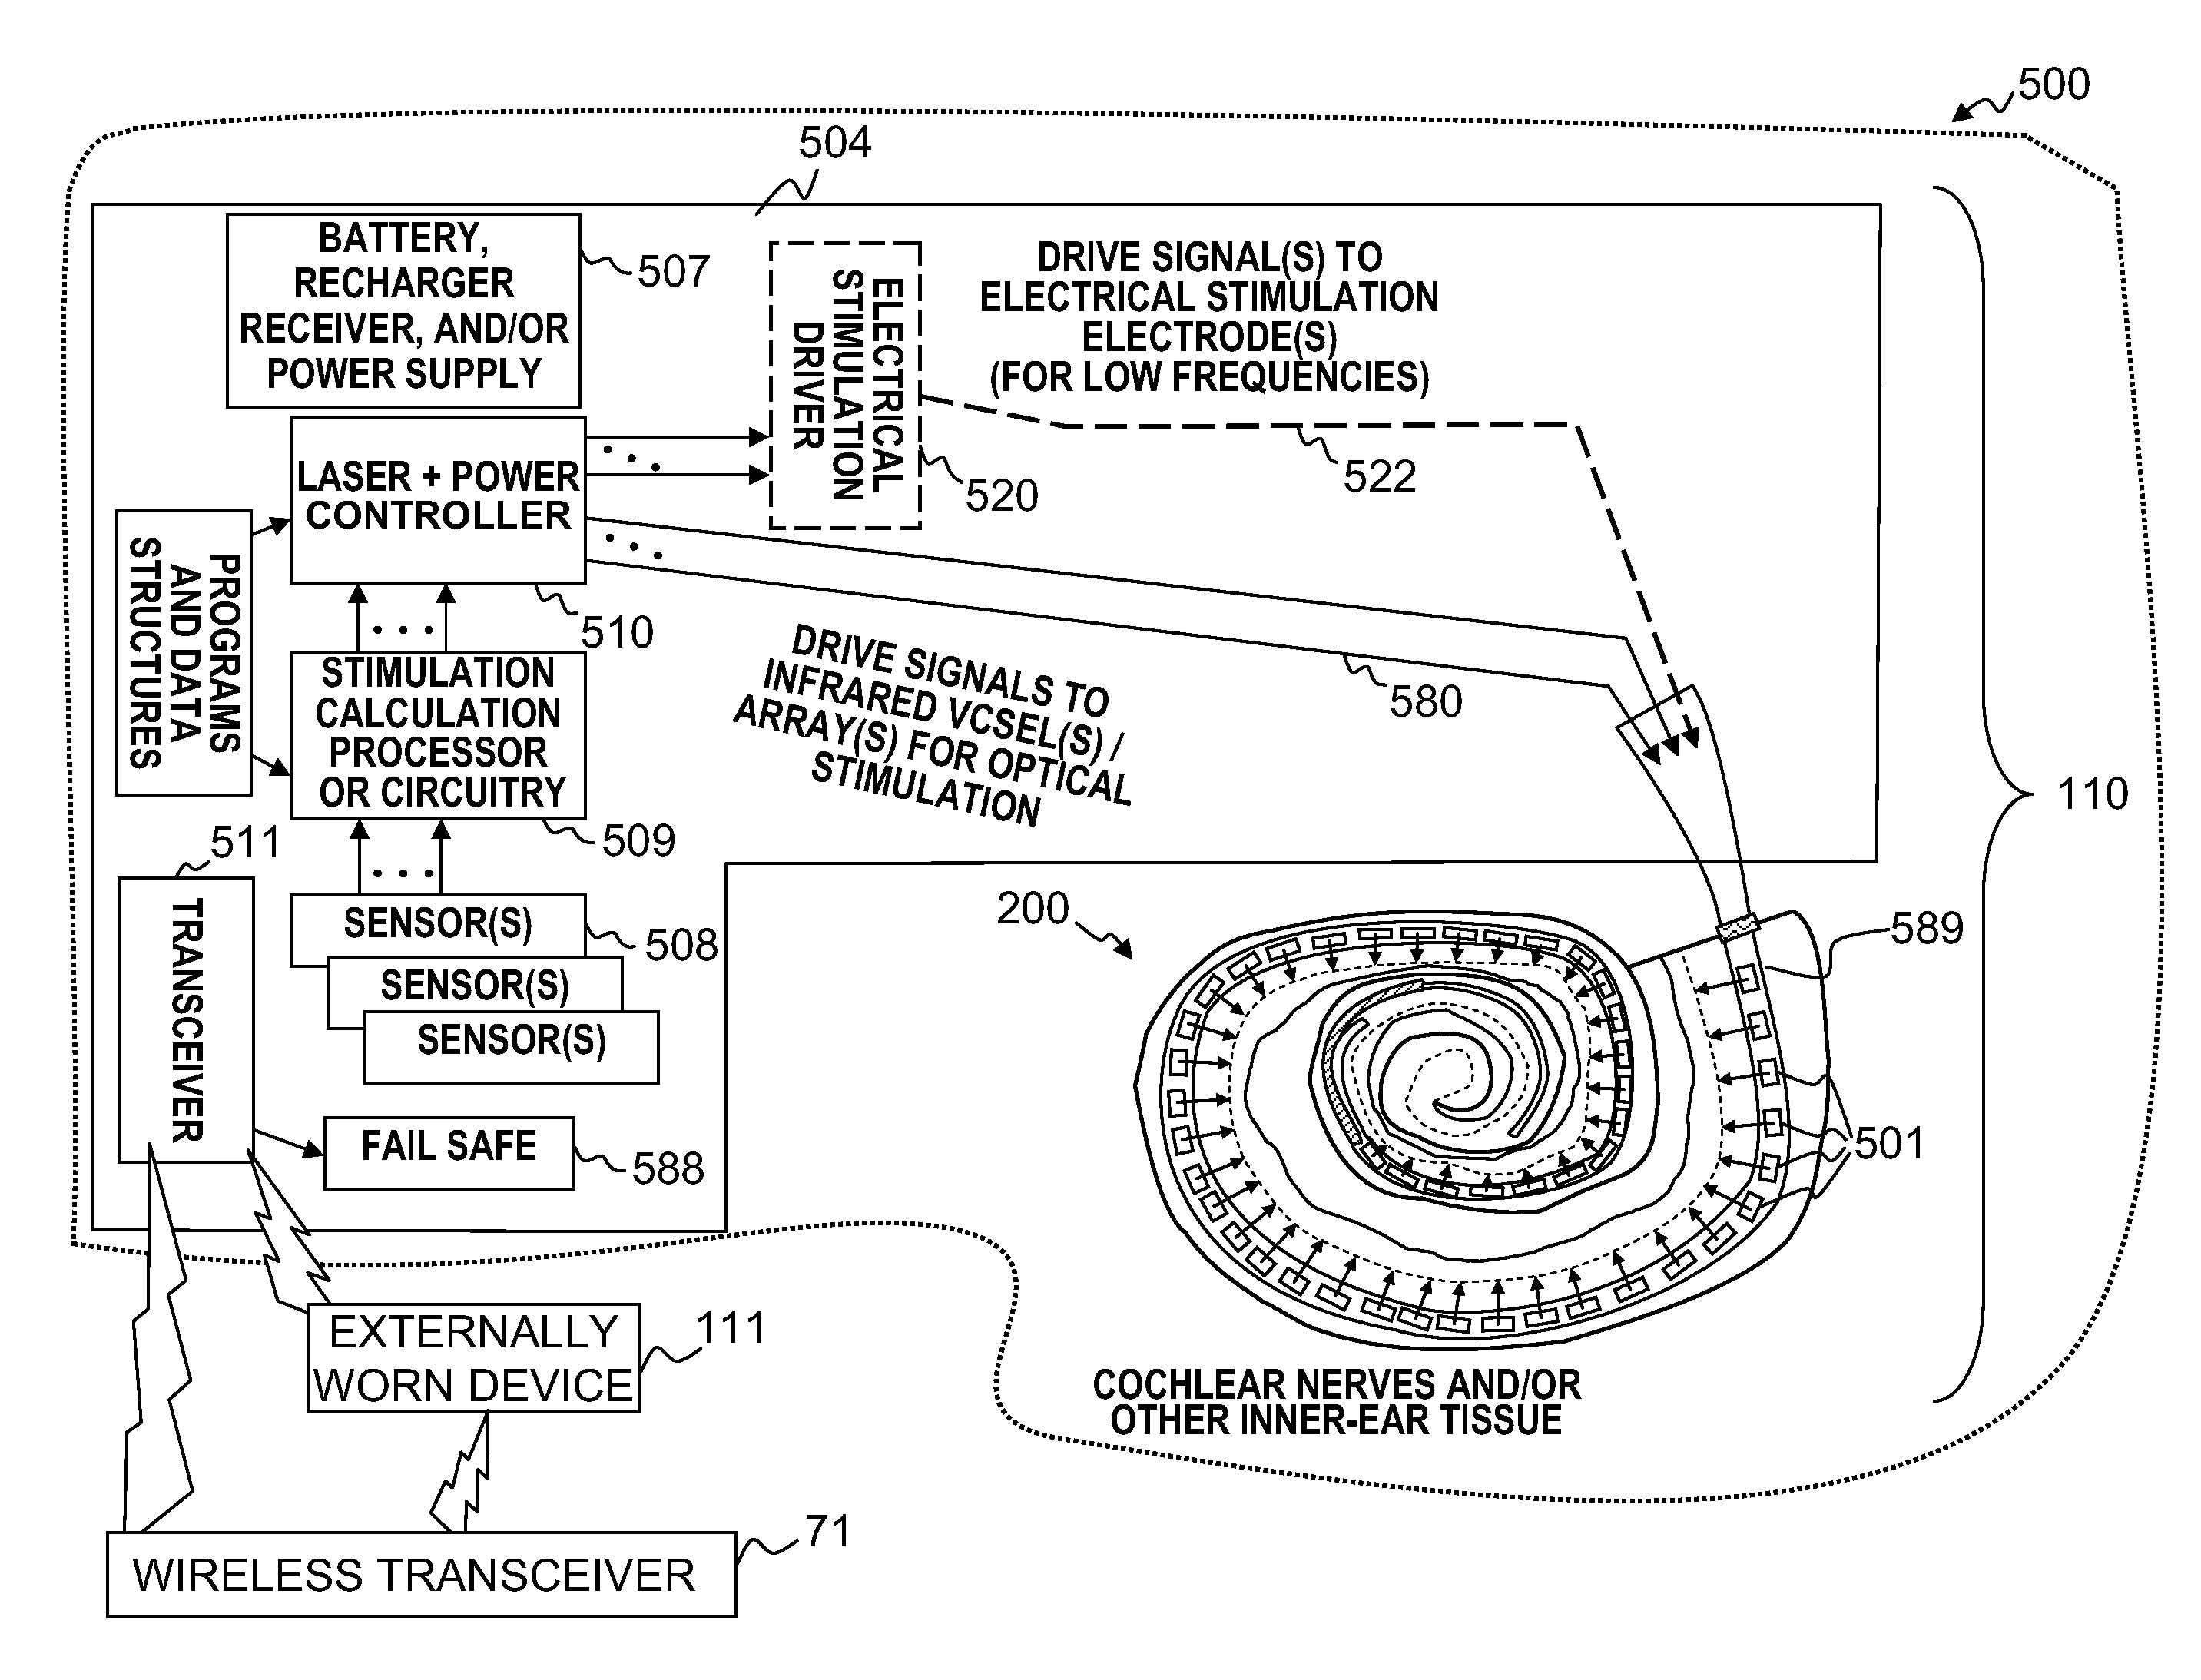 Cochlear implant using optical stimulation with encoded information designed to limit heating effects